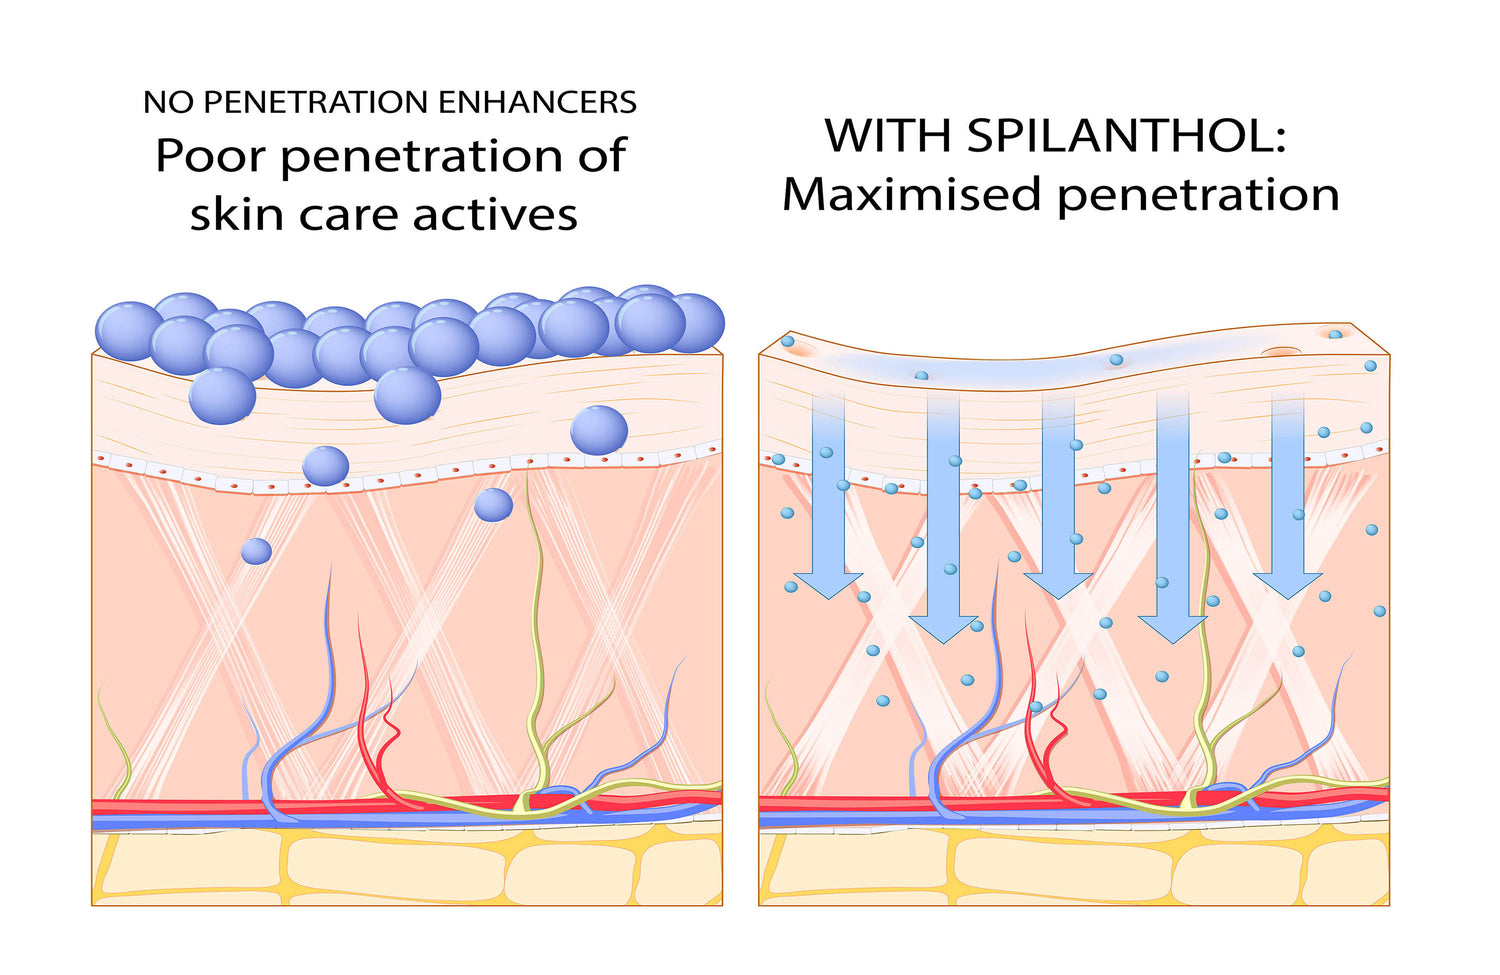 How can I improve the penetration of skin care ingredients with Splilanthol and SP Lift+